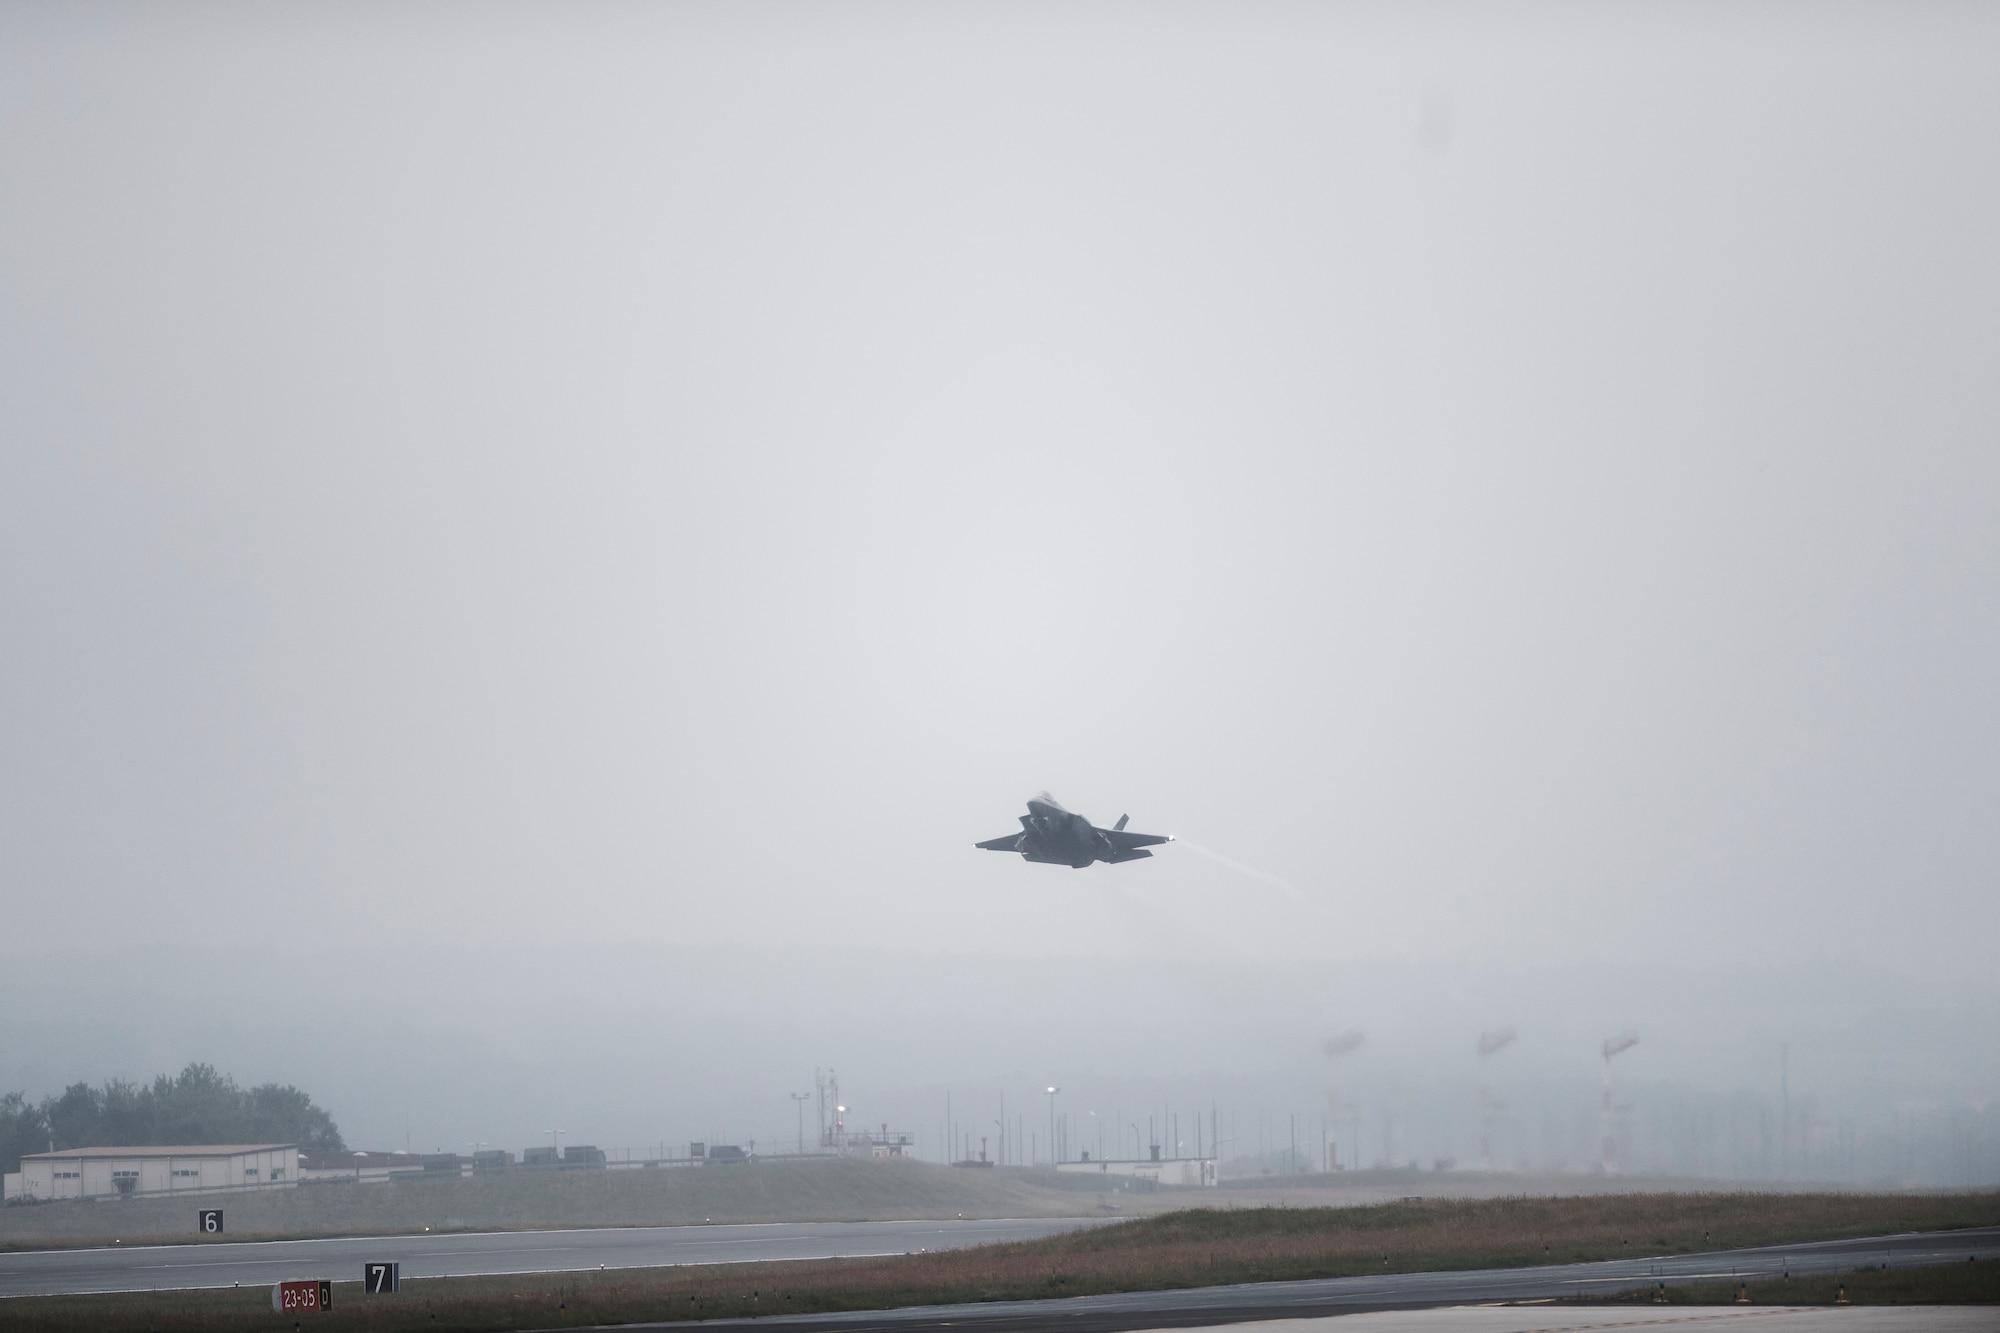 Photos of Airmen and F-35 aircraft assigned to the 158th Fighter Wing on the flight line at Spangdahlem Air Base in Germany, June 21, 2022. Aircraft and Airmen from Vermont's 158th Fighter Wing deployed to Germany for more than three months as part of ongoing NATO efforts in Europe.